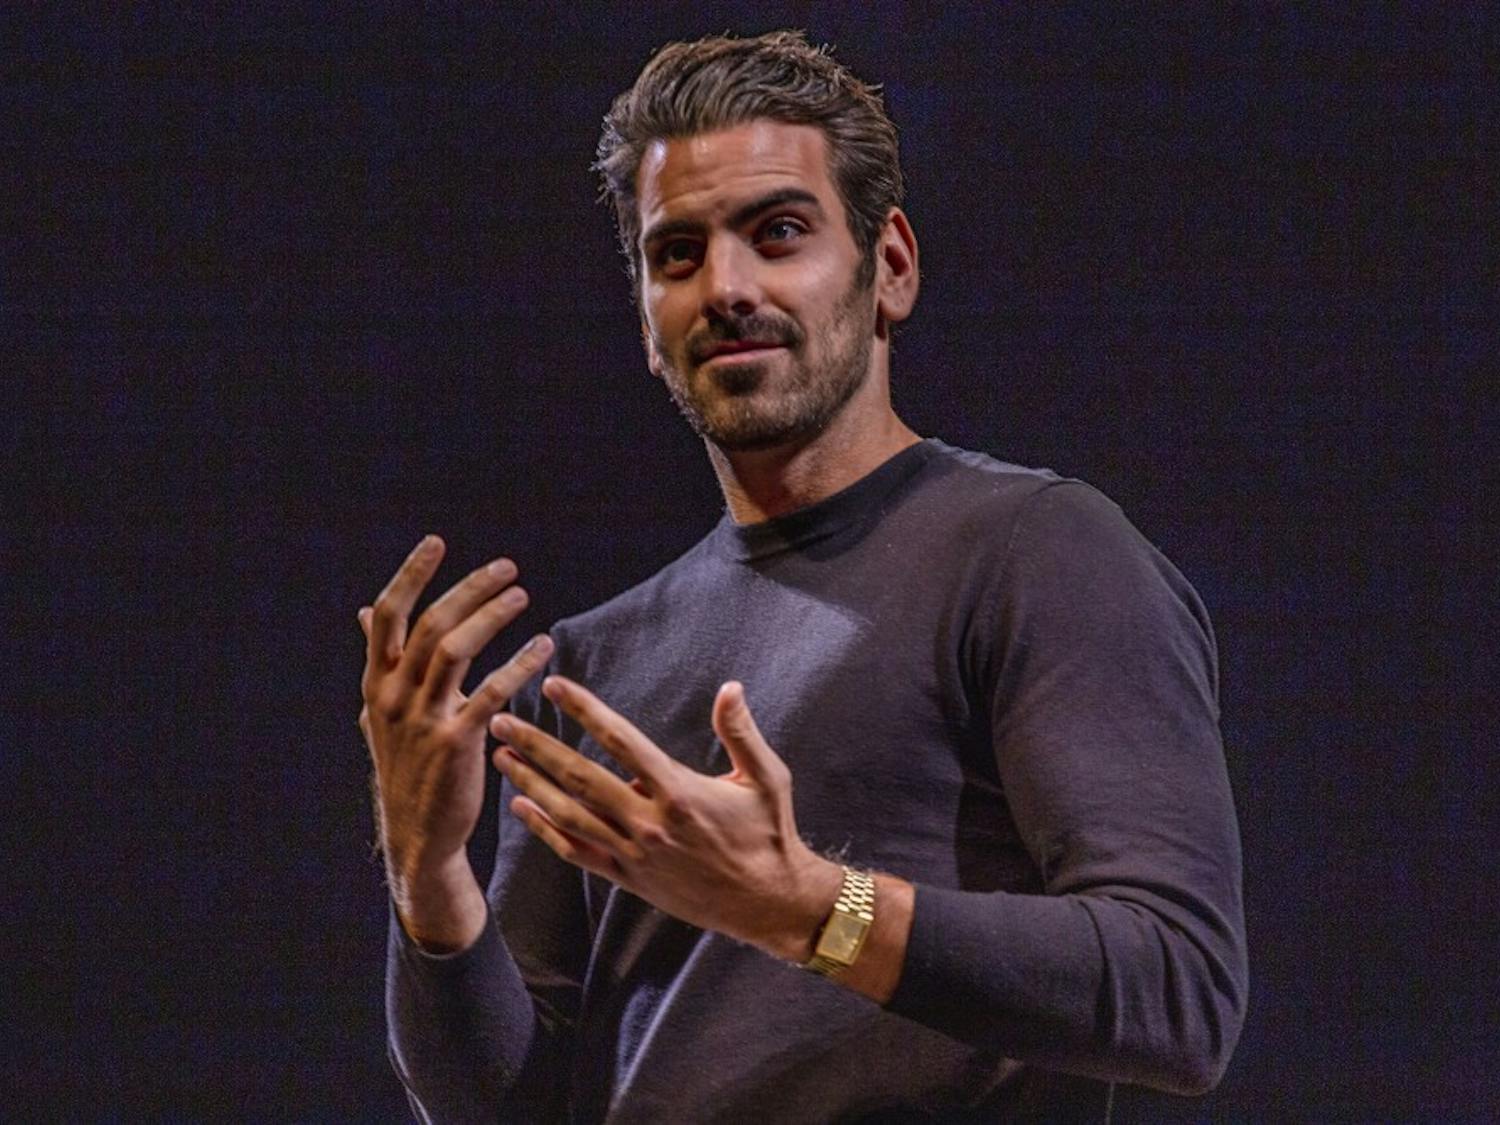 Deaf activist, actor and model Nyle DiMarco at the UB Distinguished Speaker Series on Wednesday night.